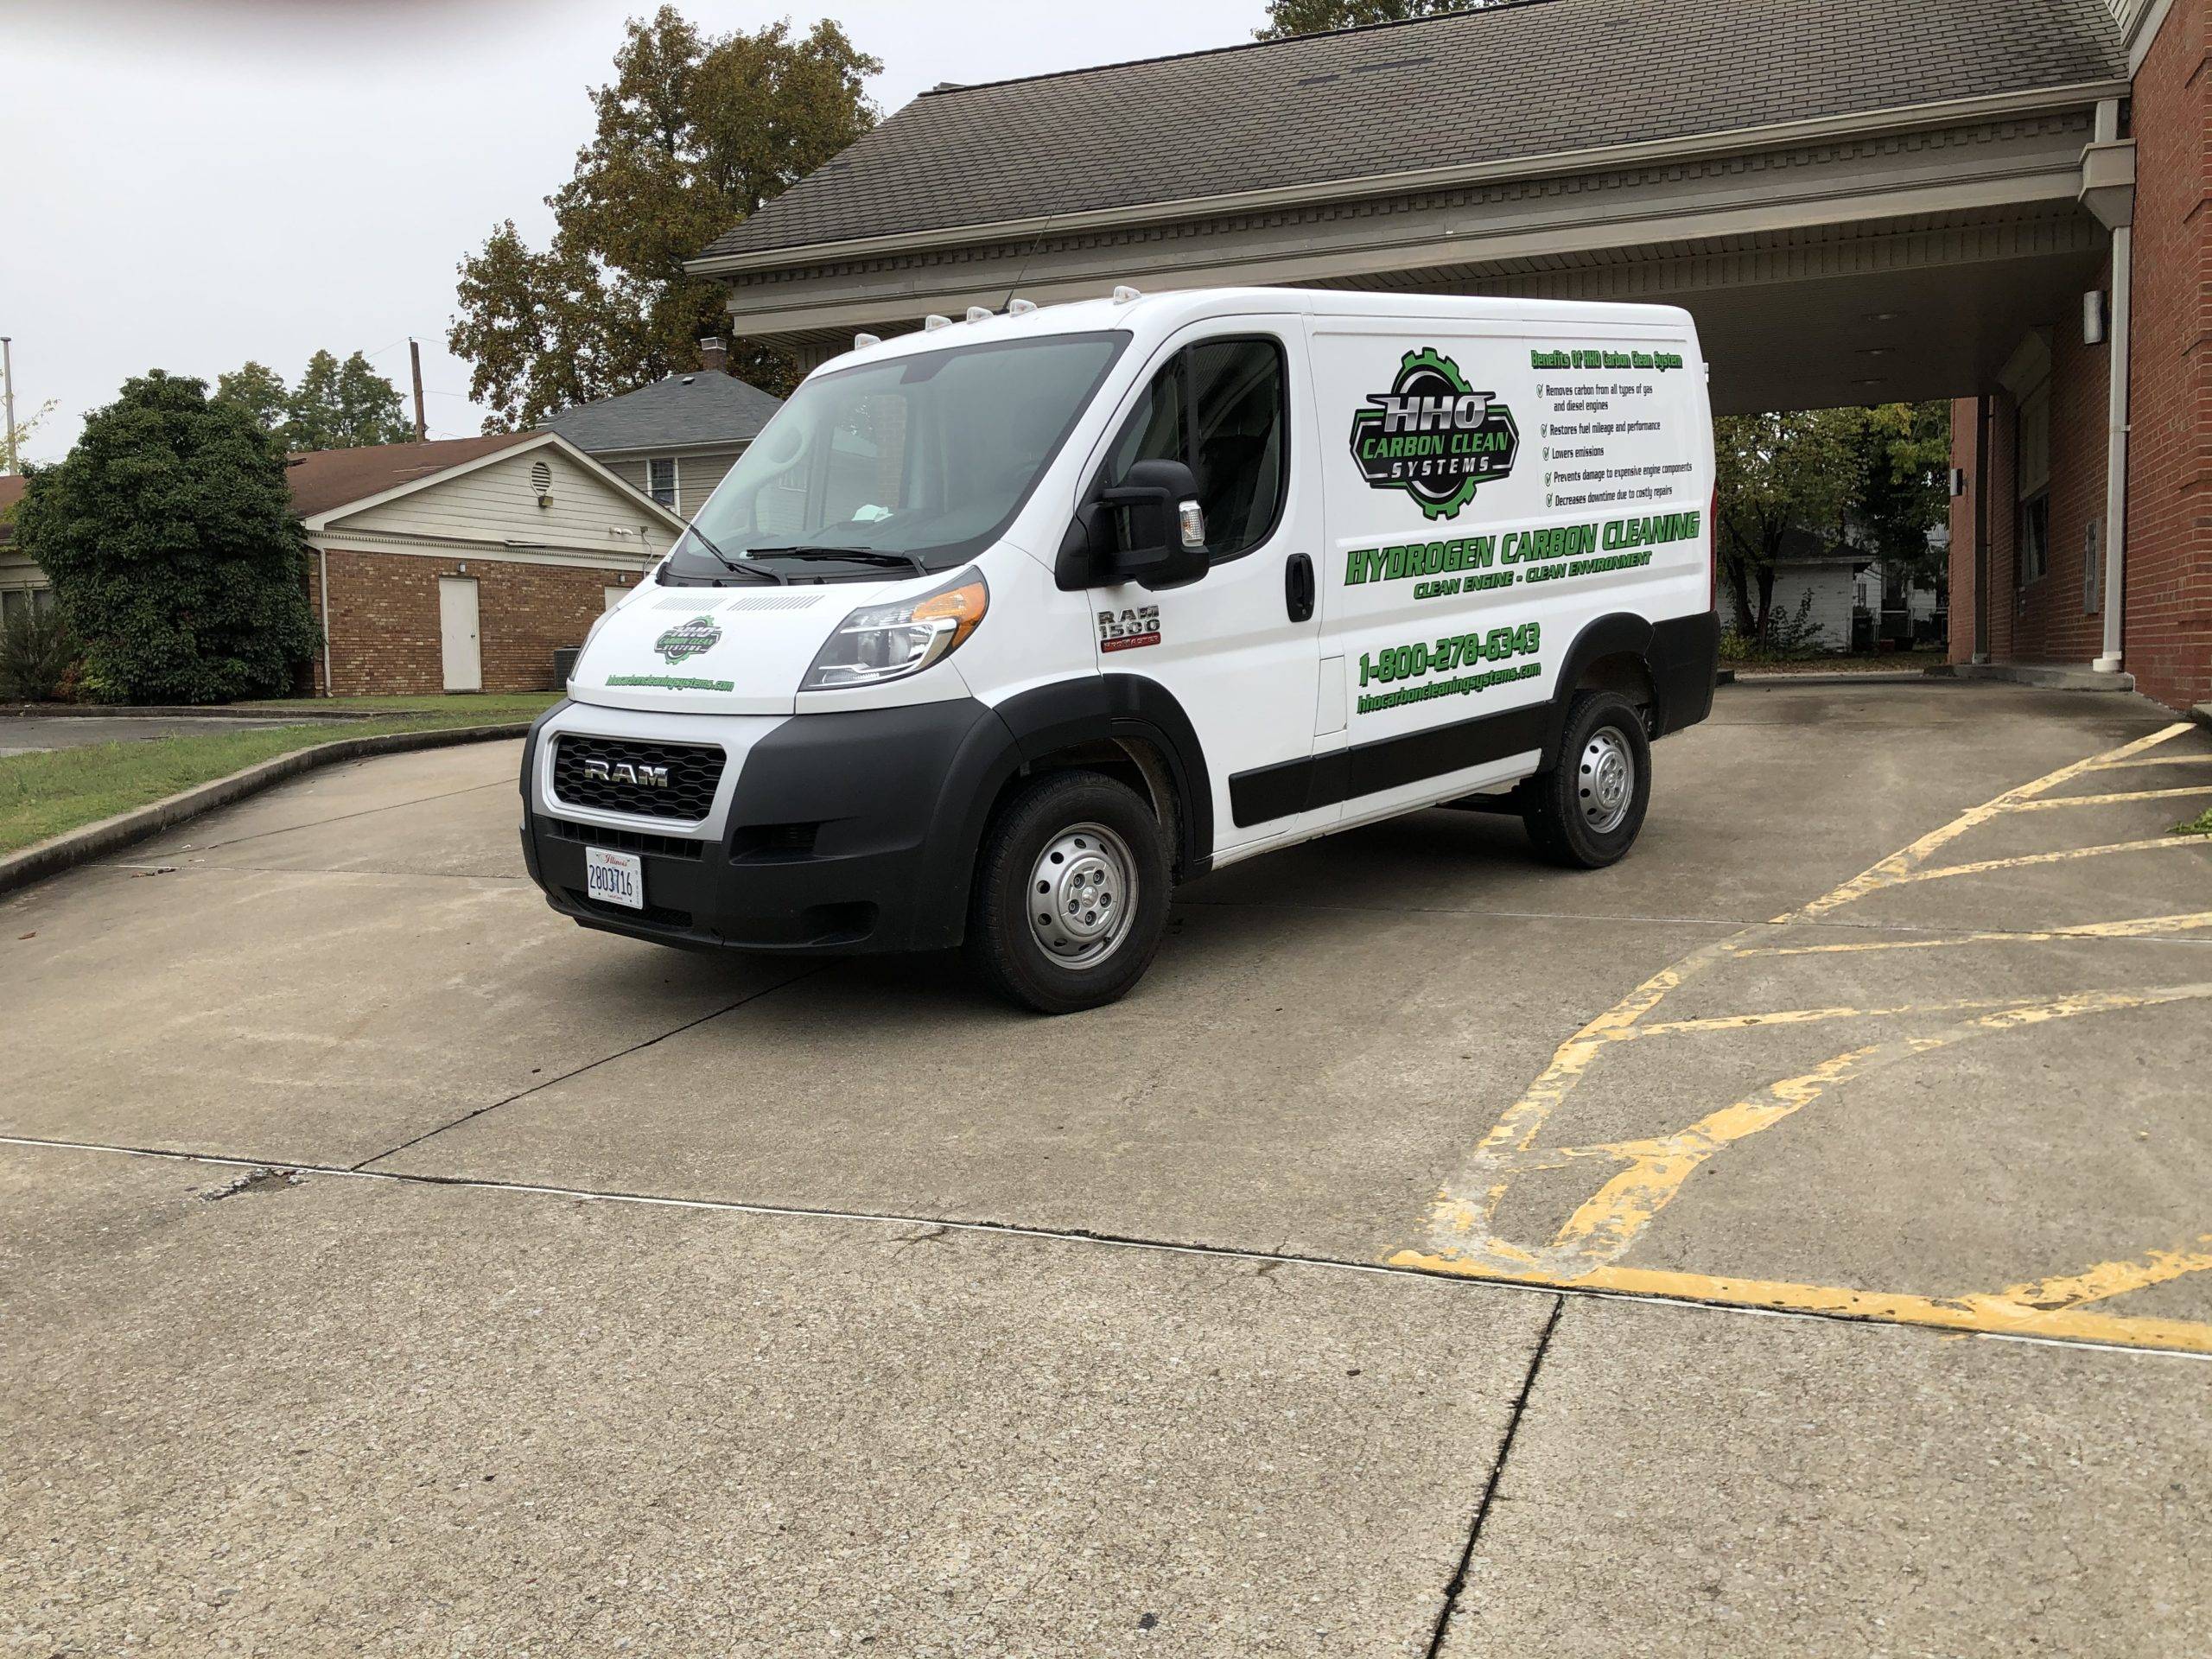 HHO Carbon Clean Systems Franchise North Carolina